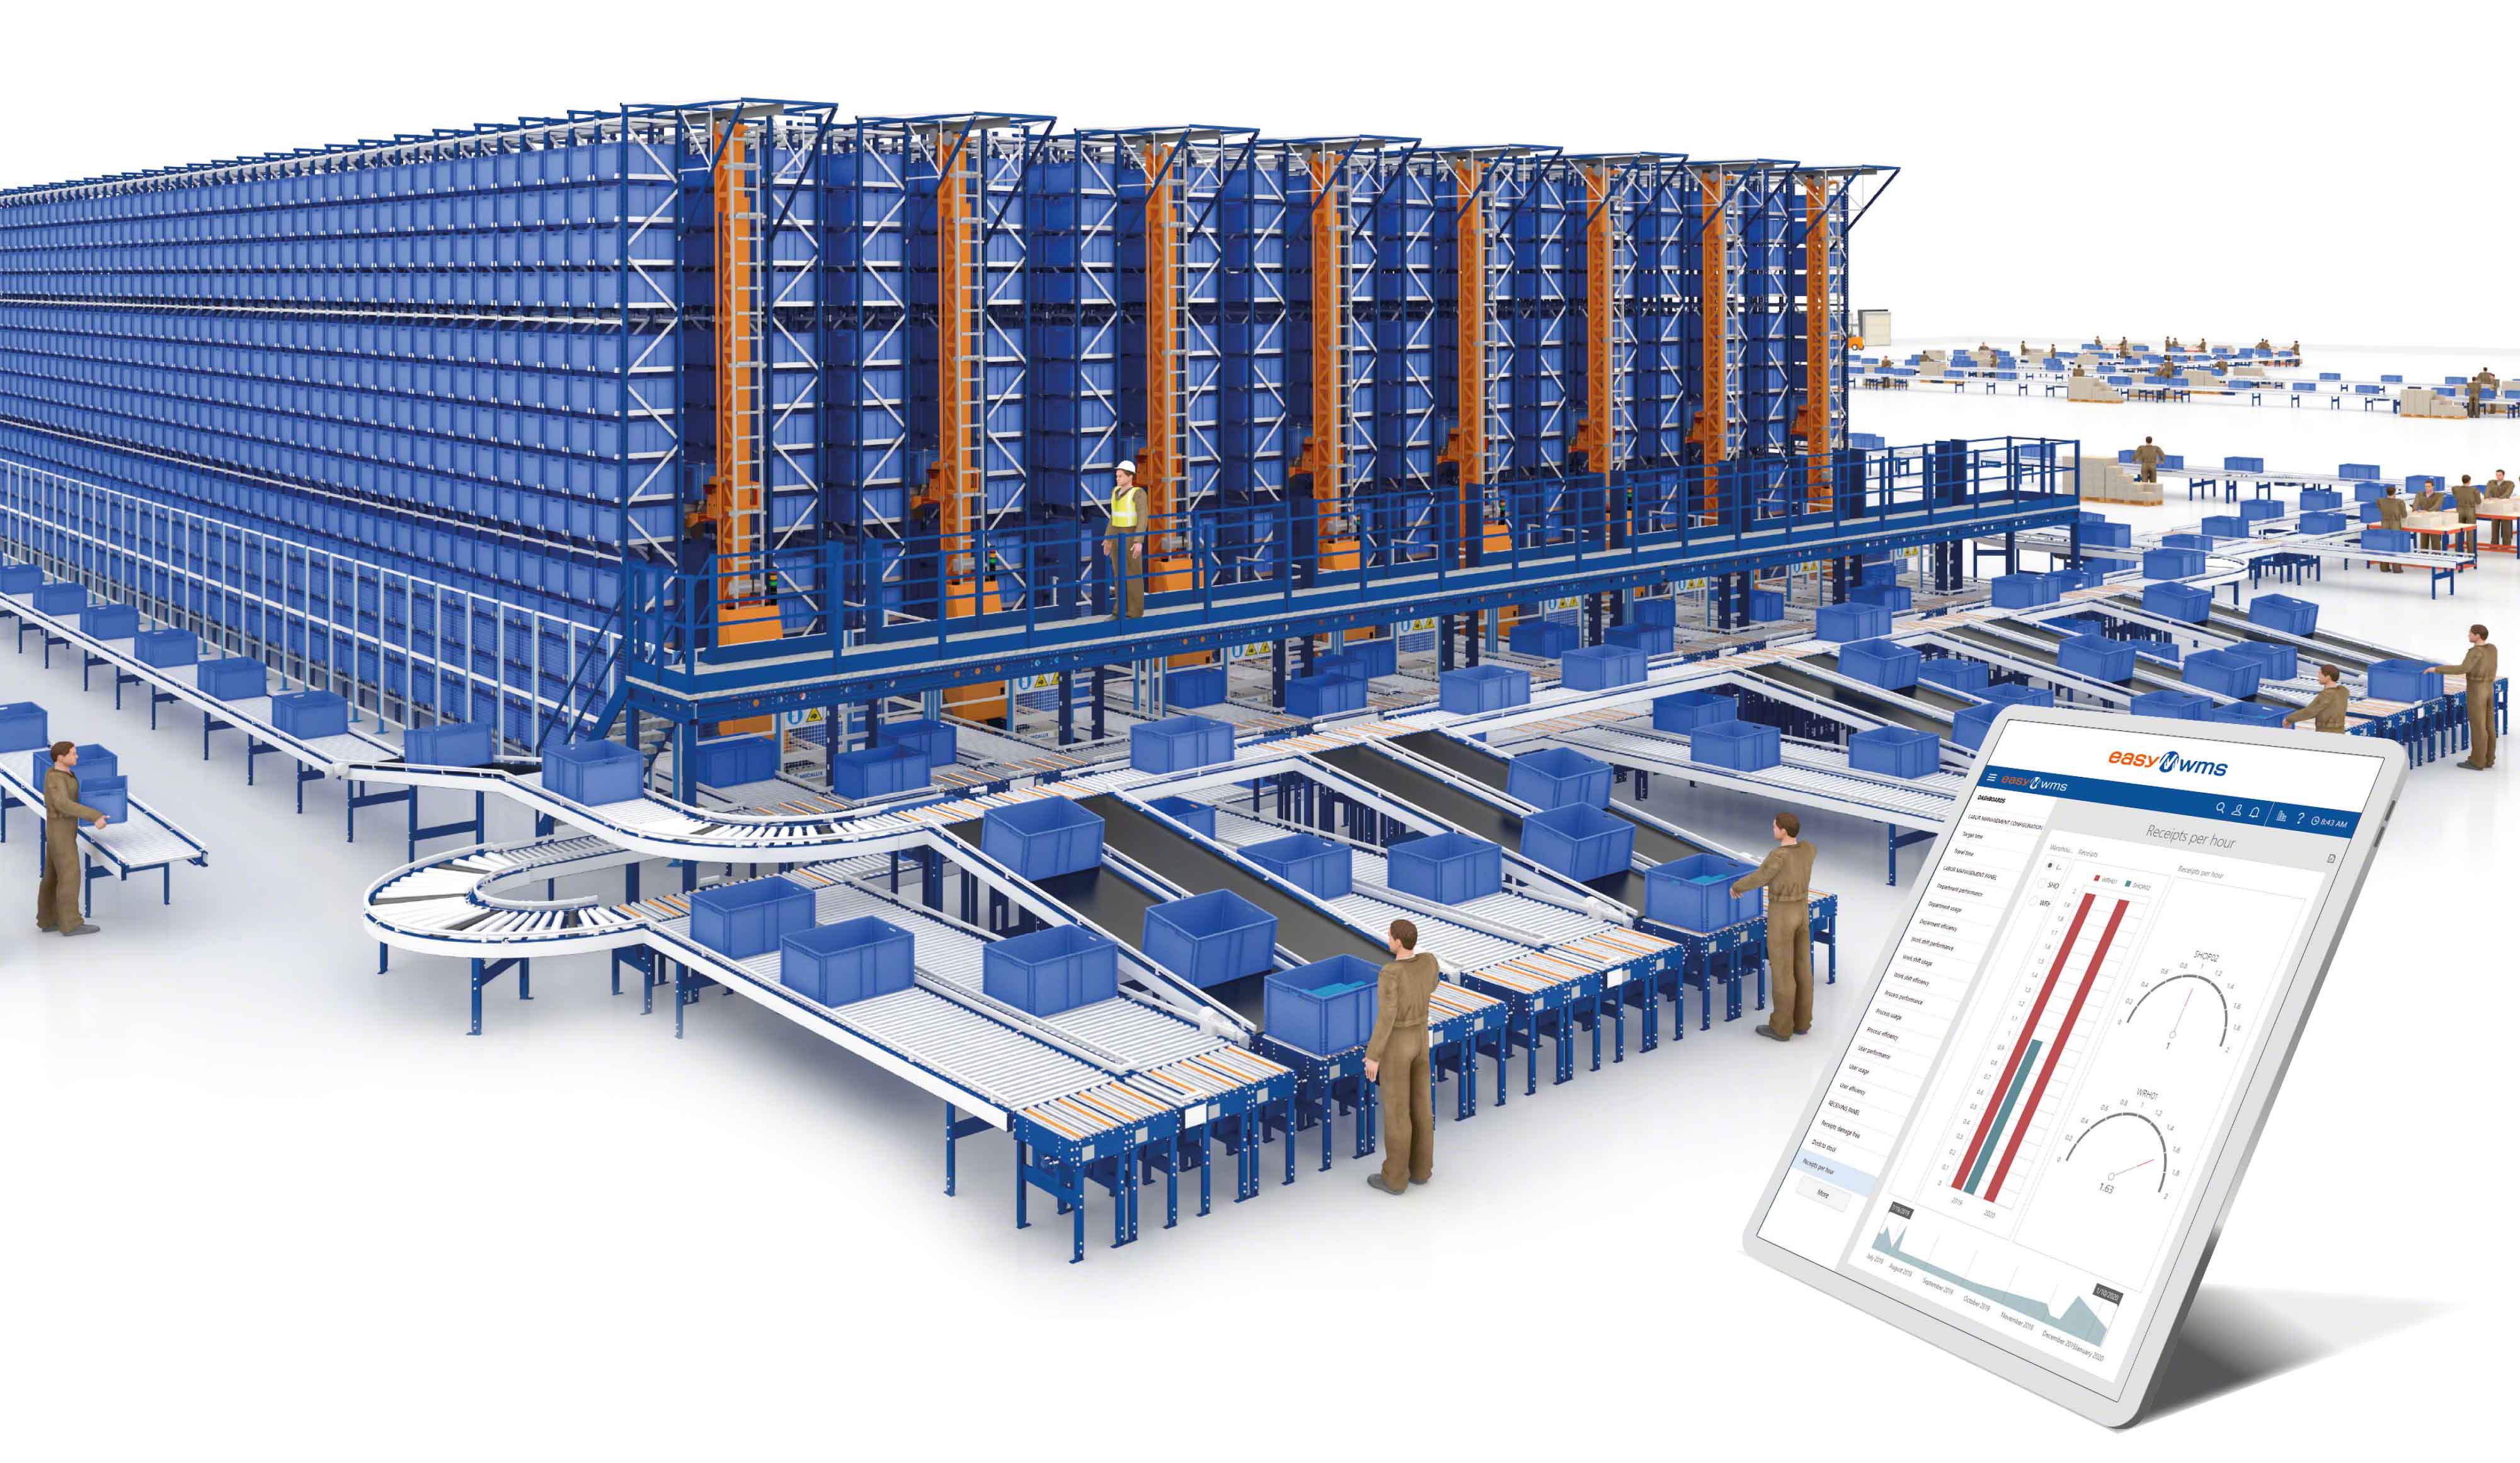 Predictive analytics applies statistical techniques to warehouse data